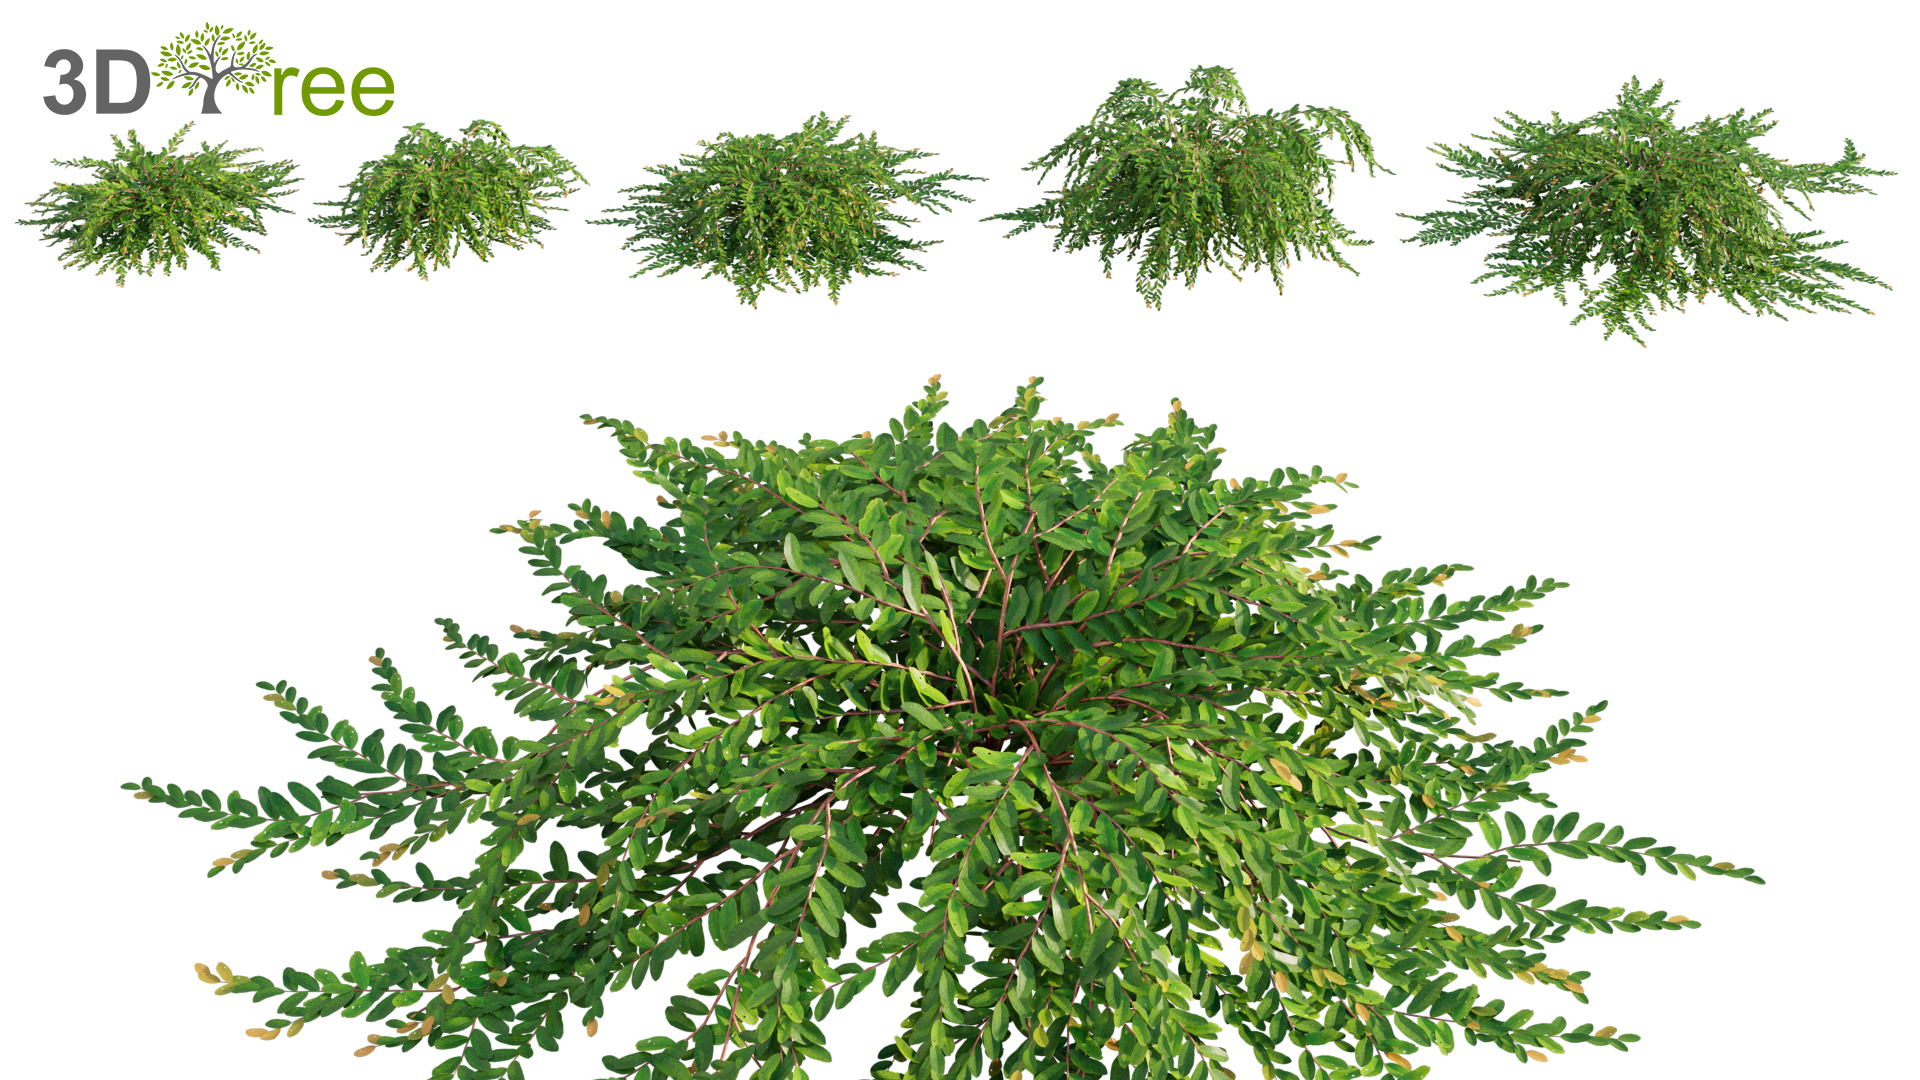 Phyllanthus cochinchinensis muell (3D model) - 3DTree